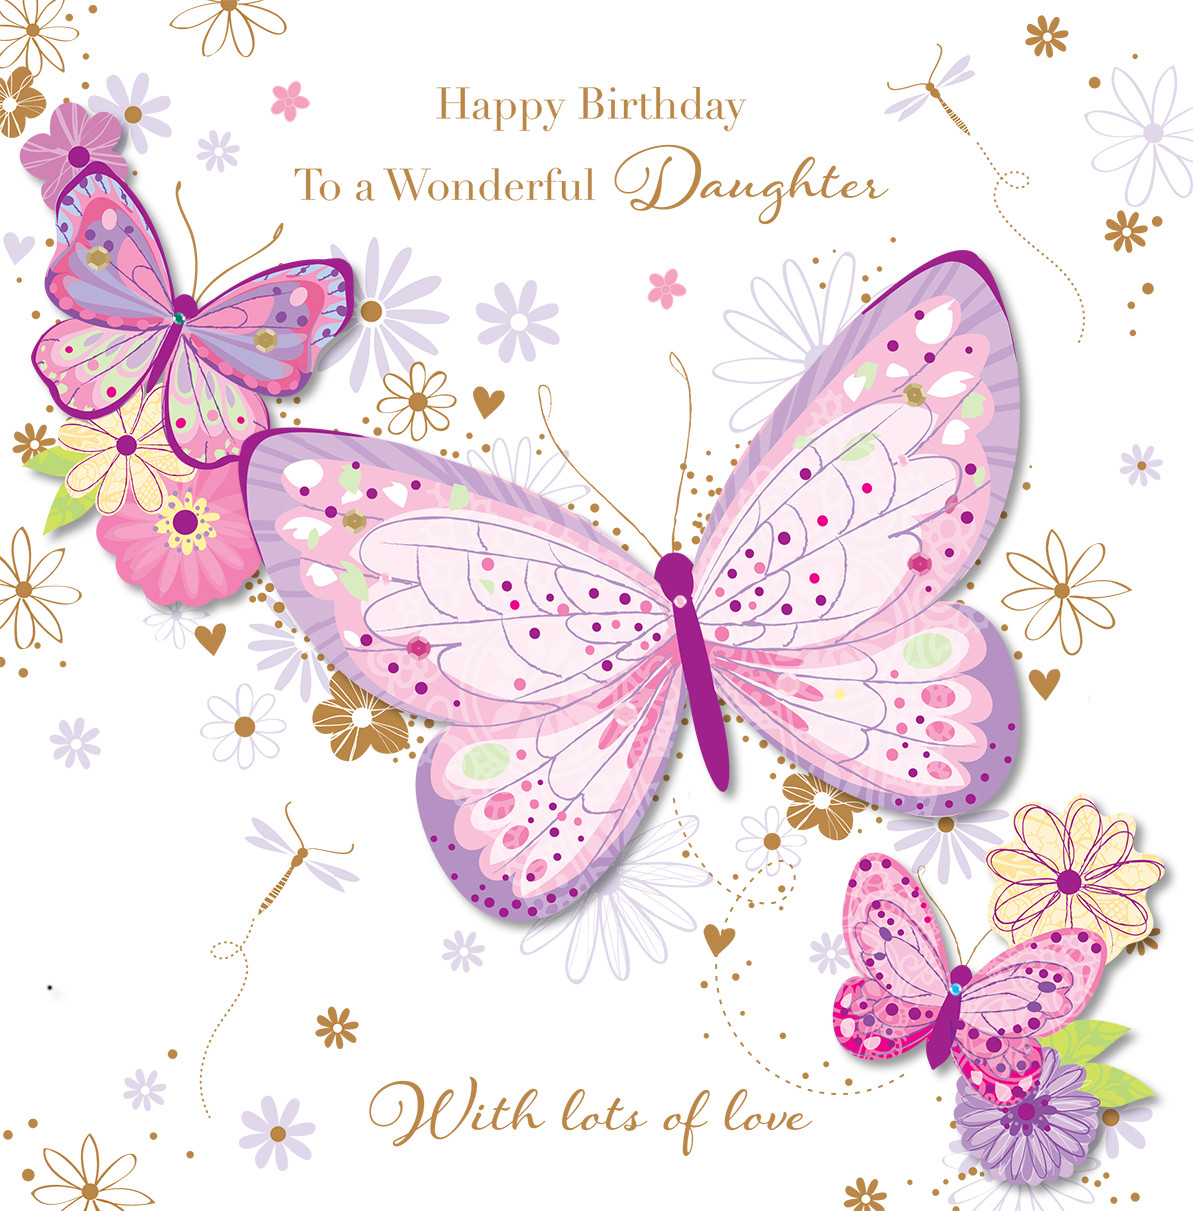 Free Birthday Cards For Daughter
 Wonderful Daughter Happy Birthday Greeting Card